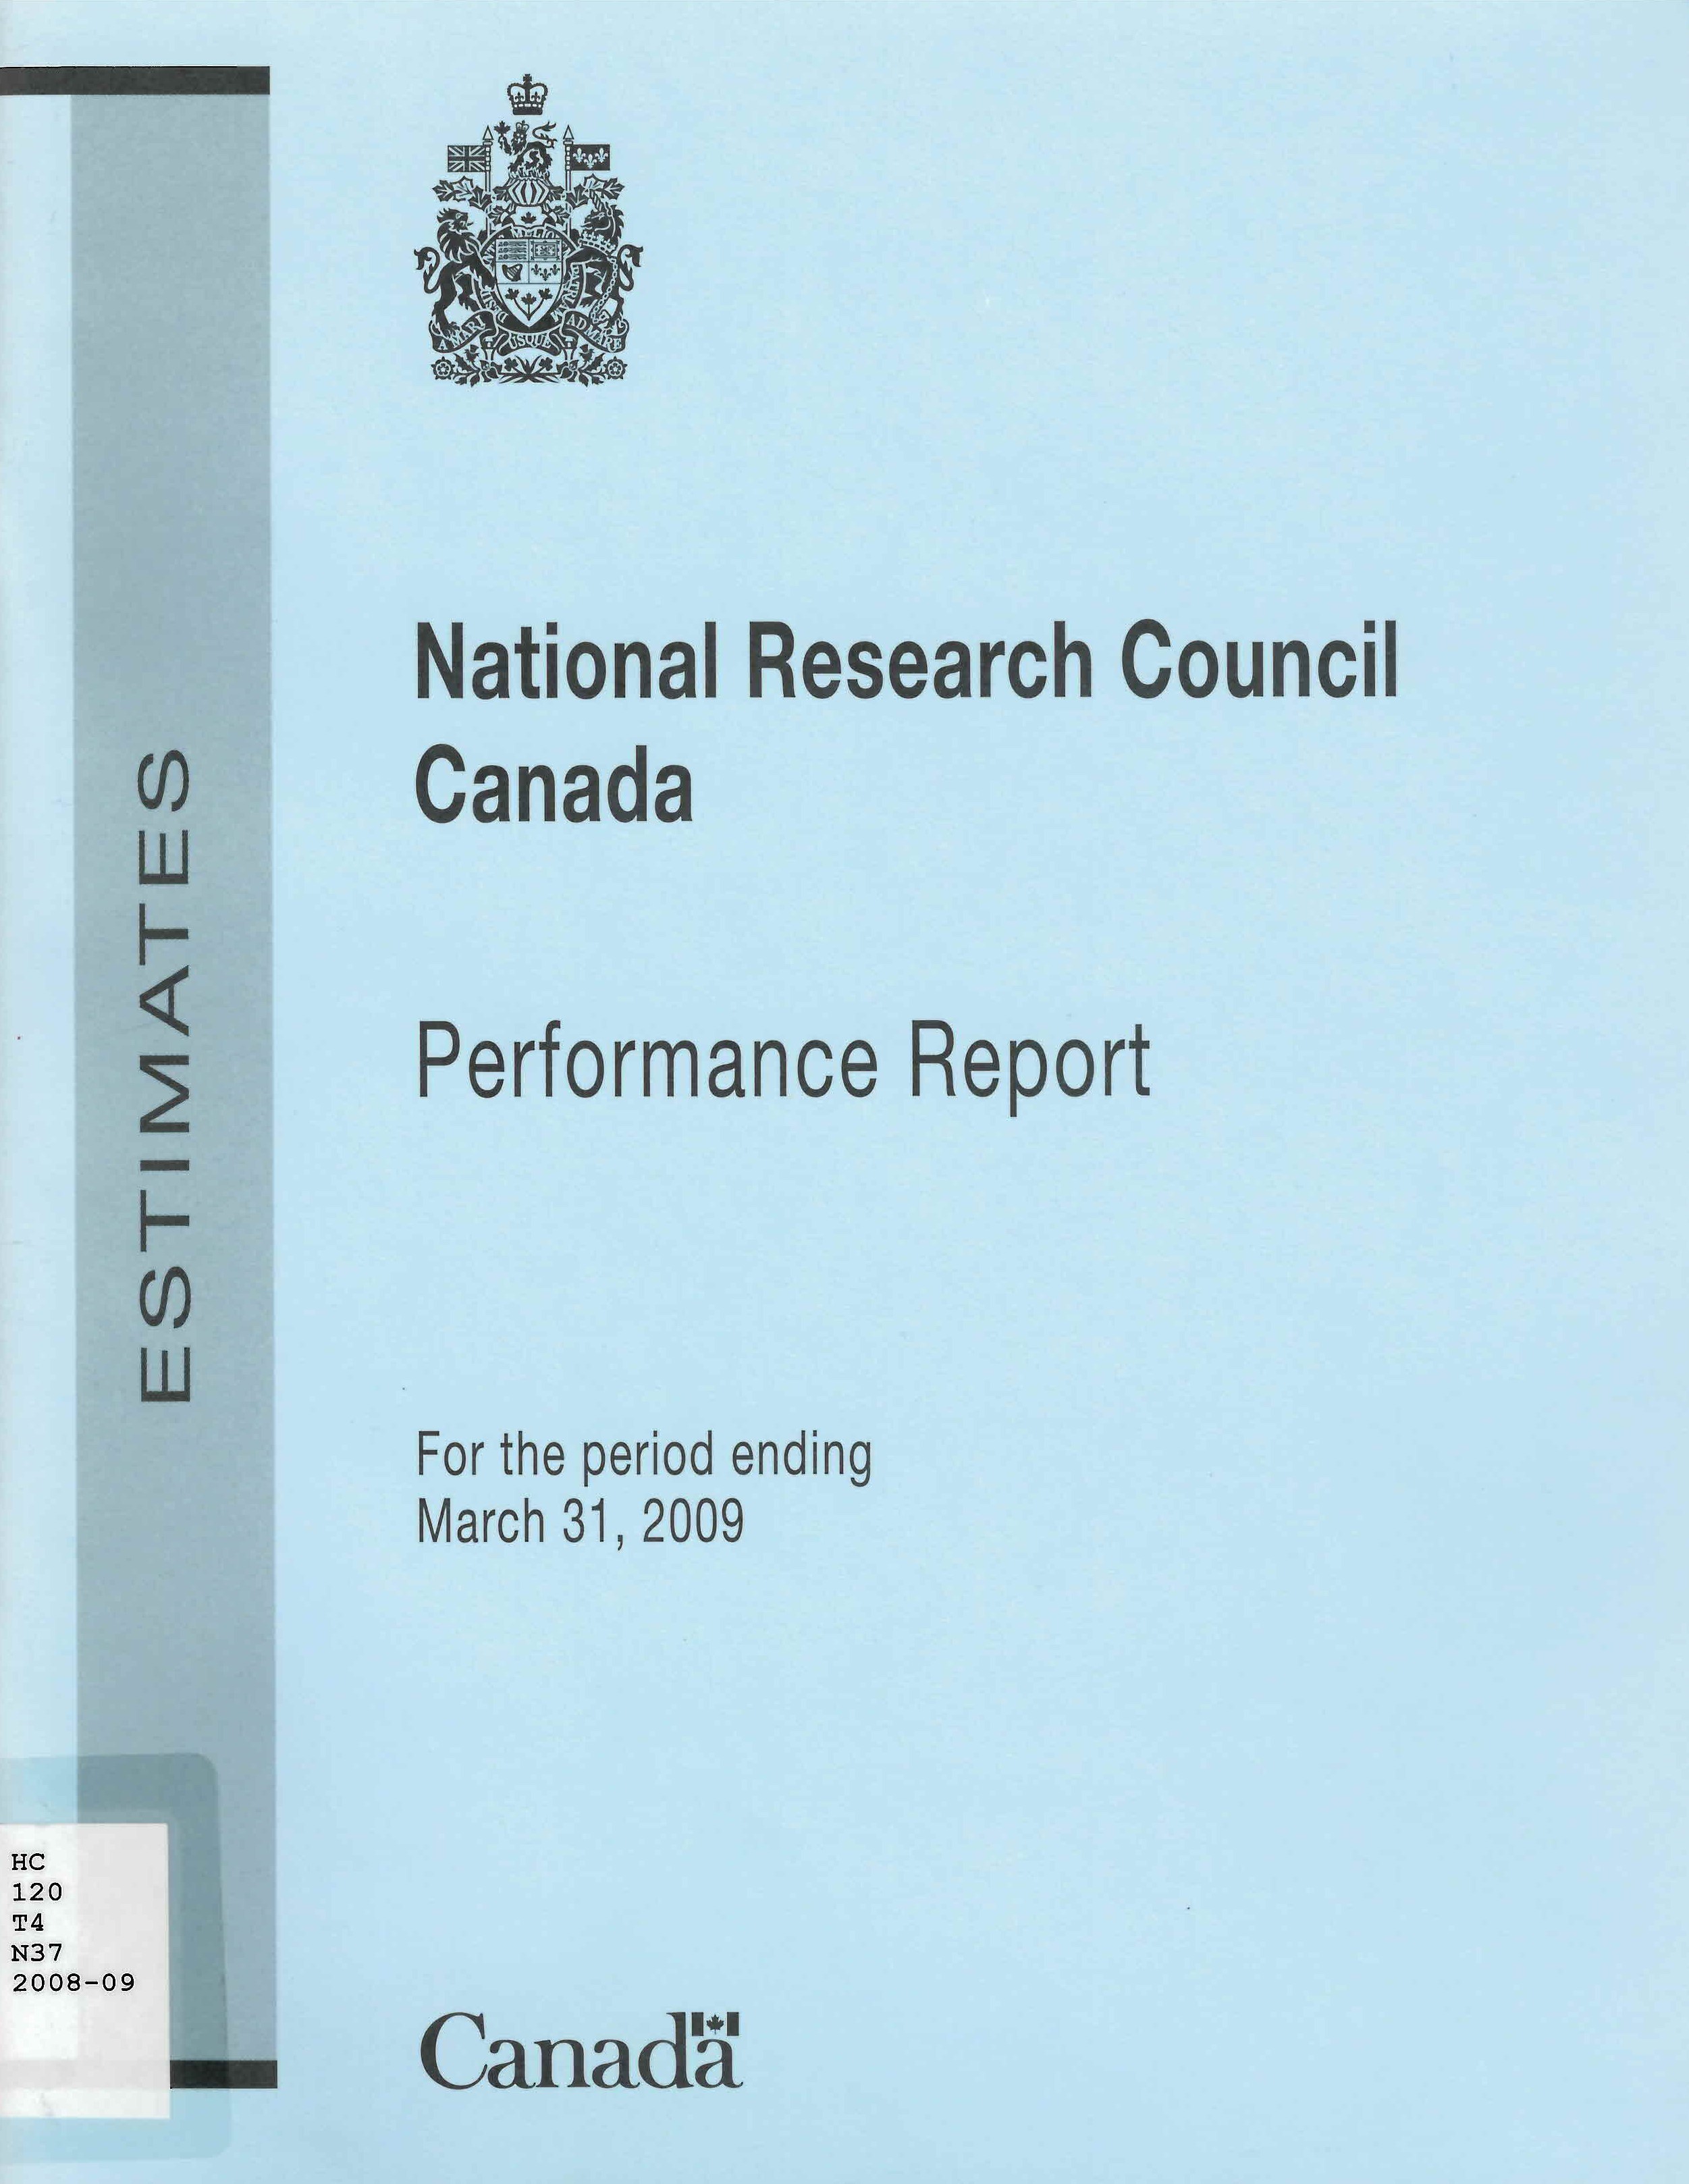 National Research Council Canada : departmental performance report